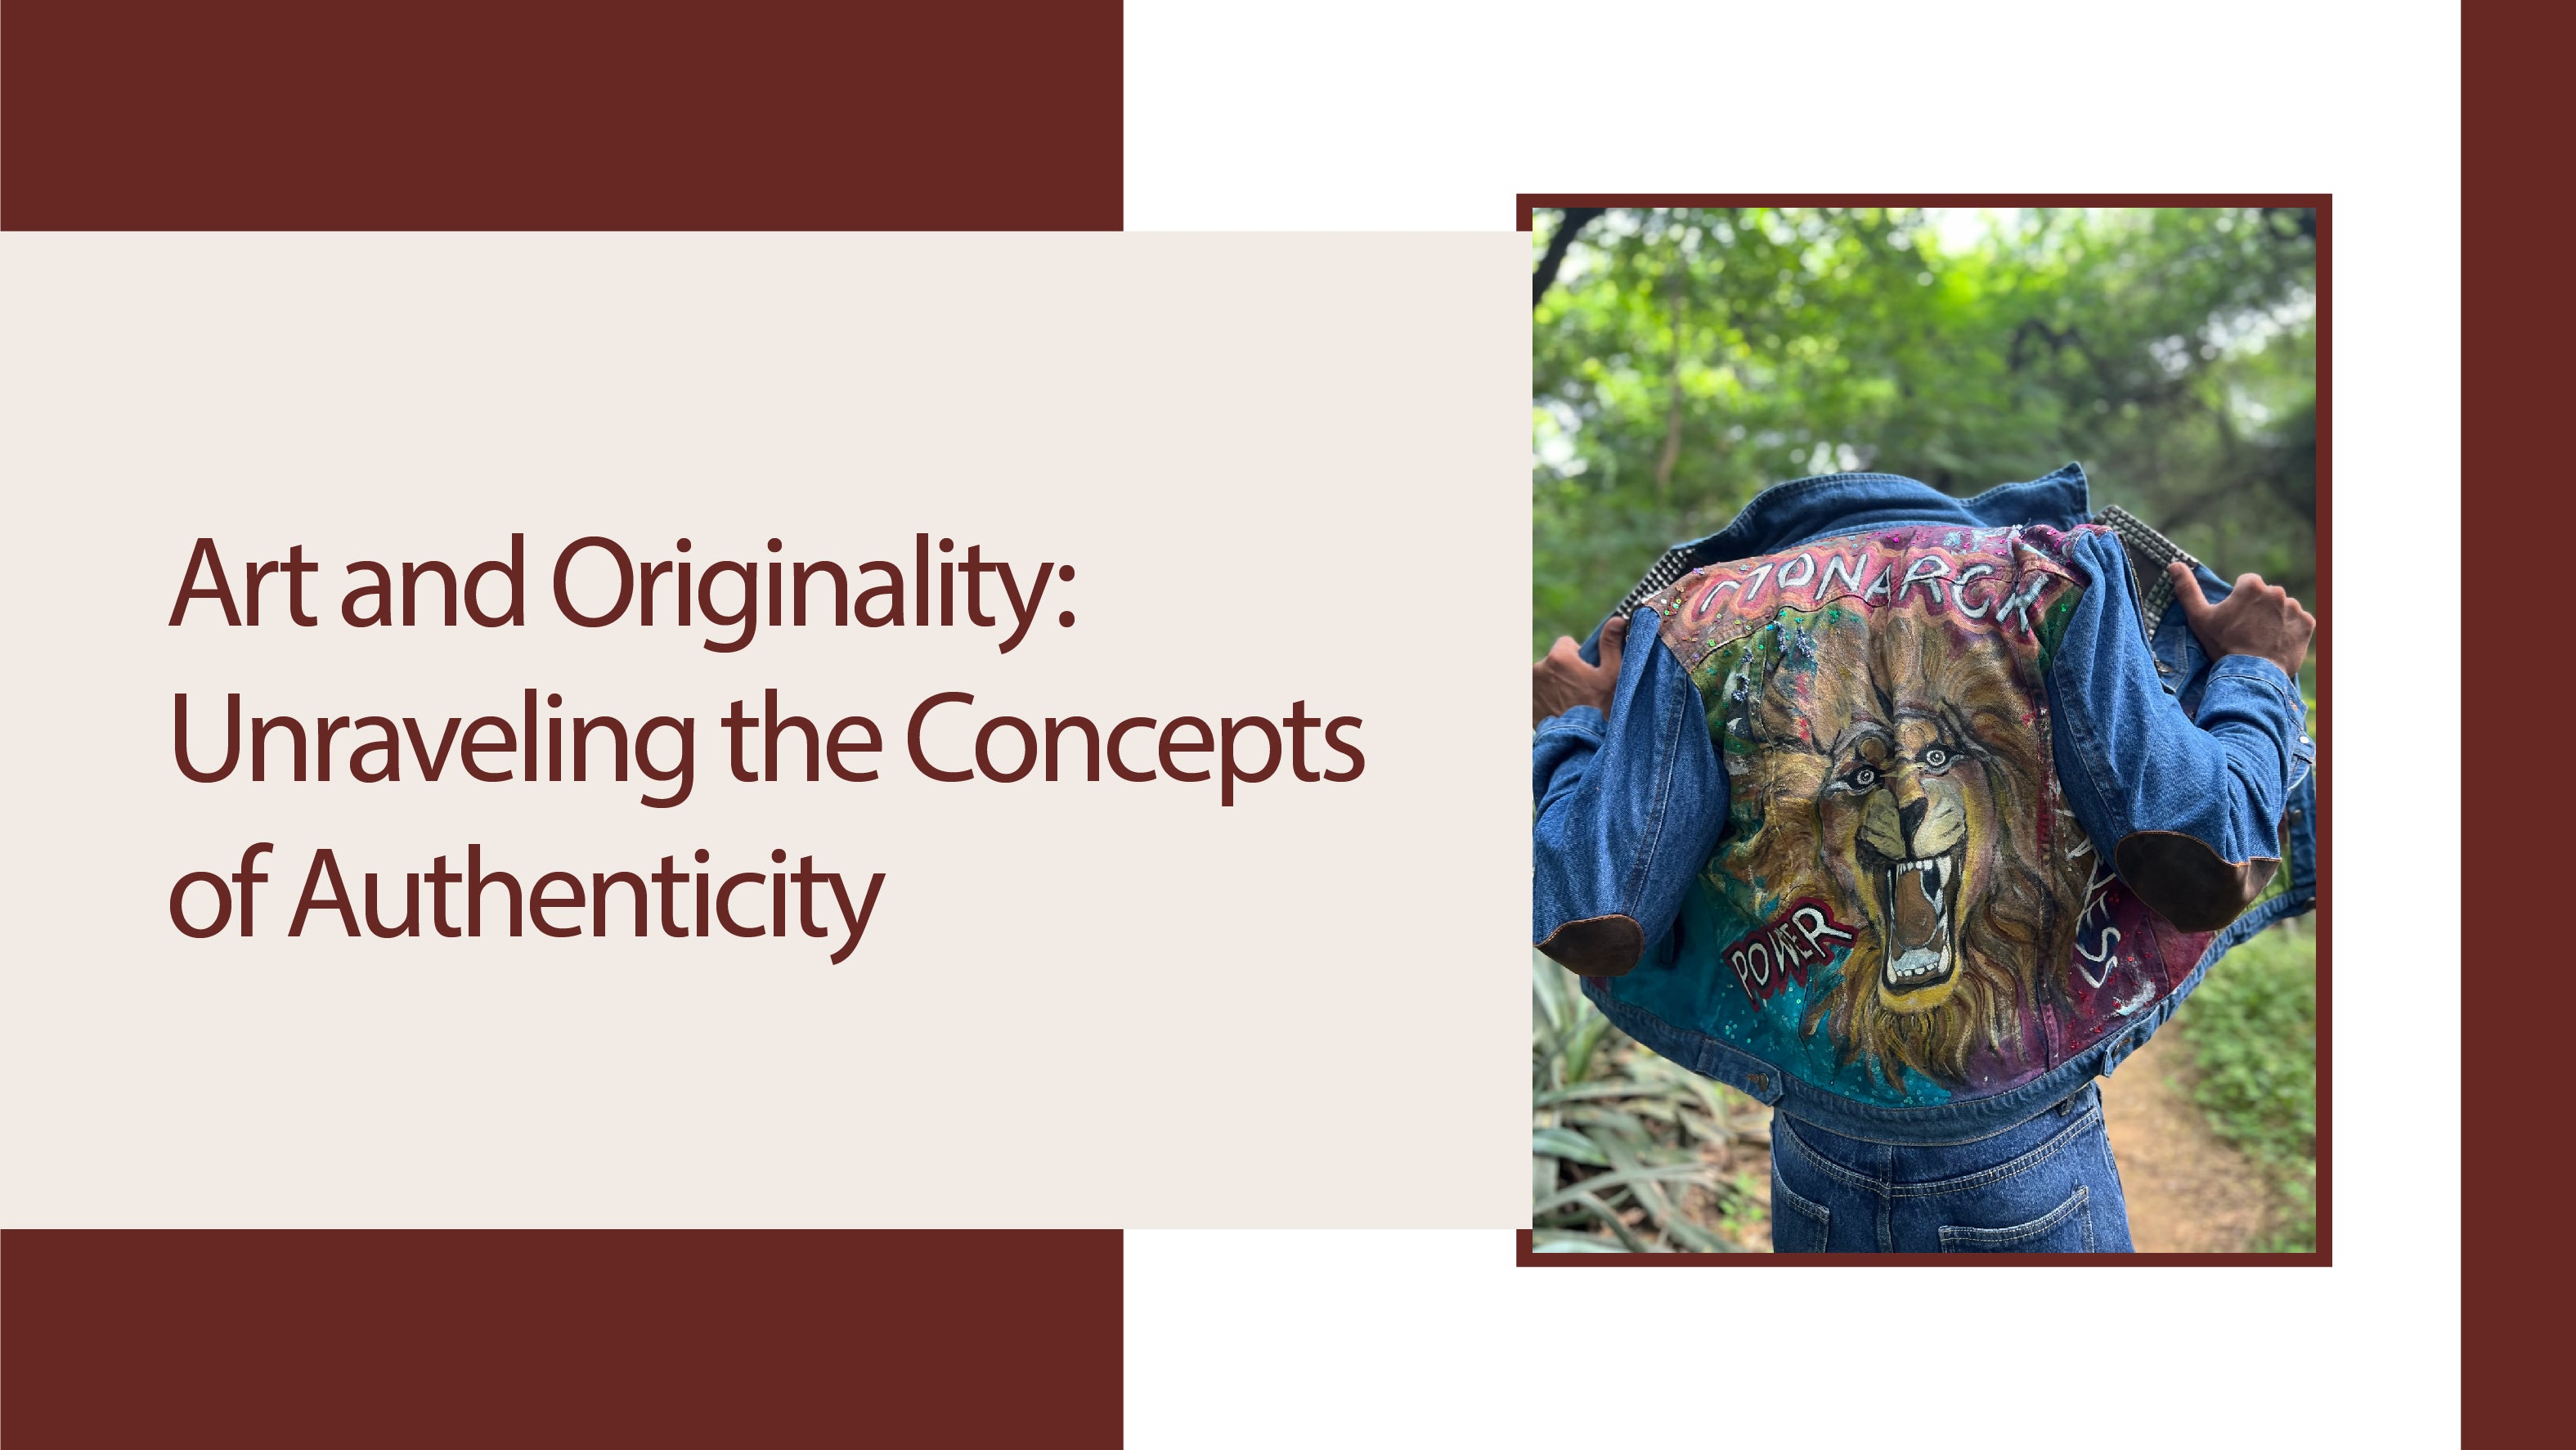 ART AND ORIGINALITY: UNRAVELING THE CONCEPTS OF AUTHENTICITY